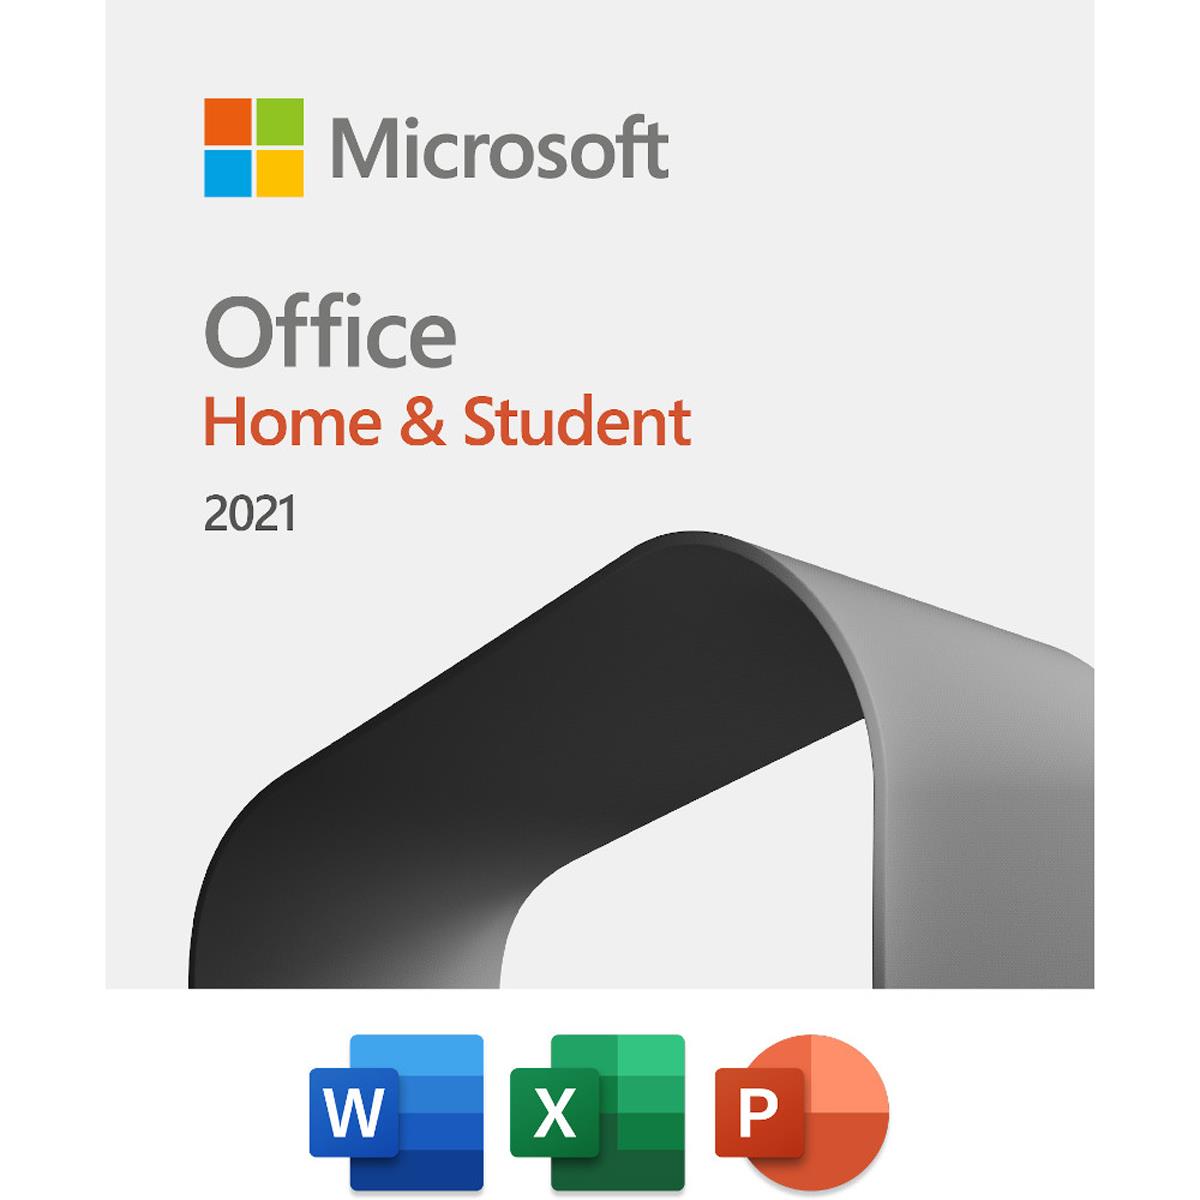 Image of Microsoft Office Home &amp; Student 2021 for PC and Mac